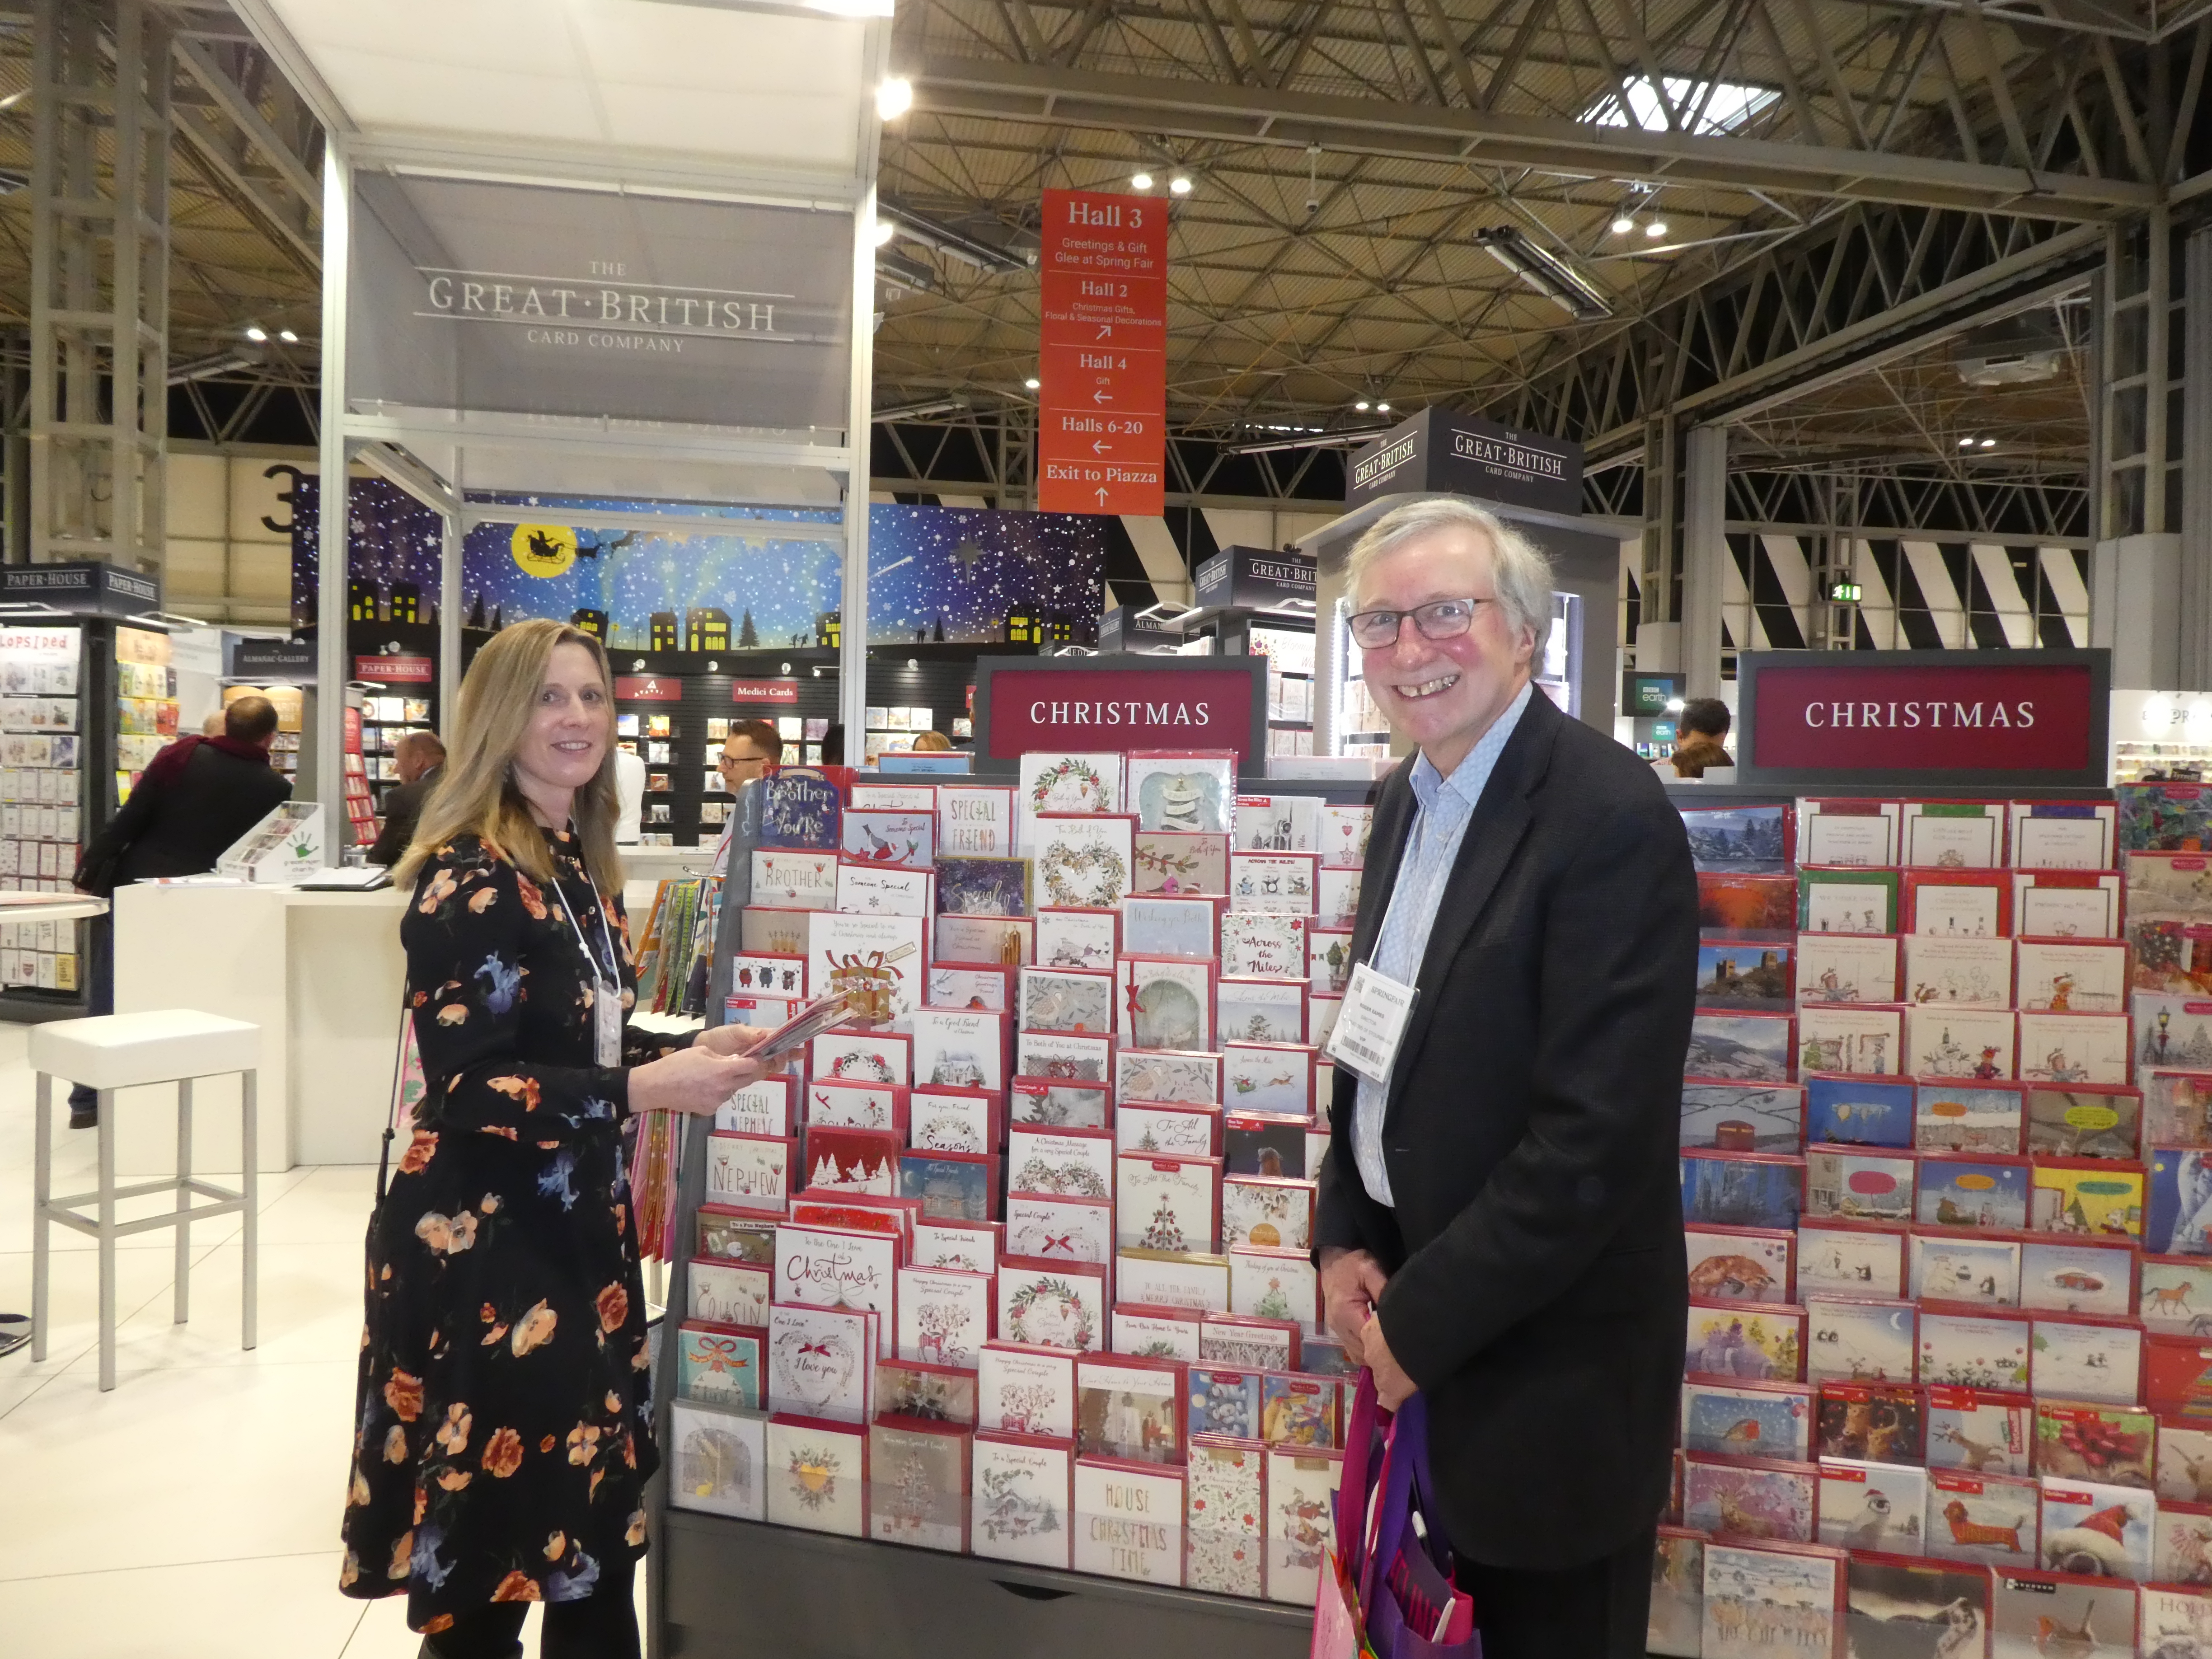 Above: Celebrations’ Roger Eames with his business partner Laura Didehvar on the GBCC stand at Spring Fair looking at the new Christmas collection.